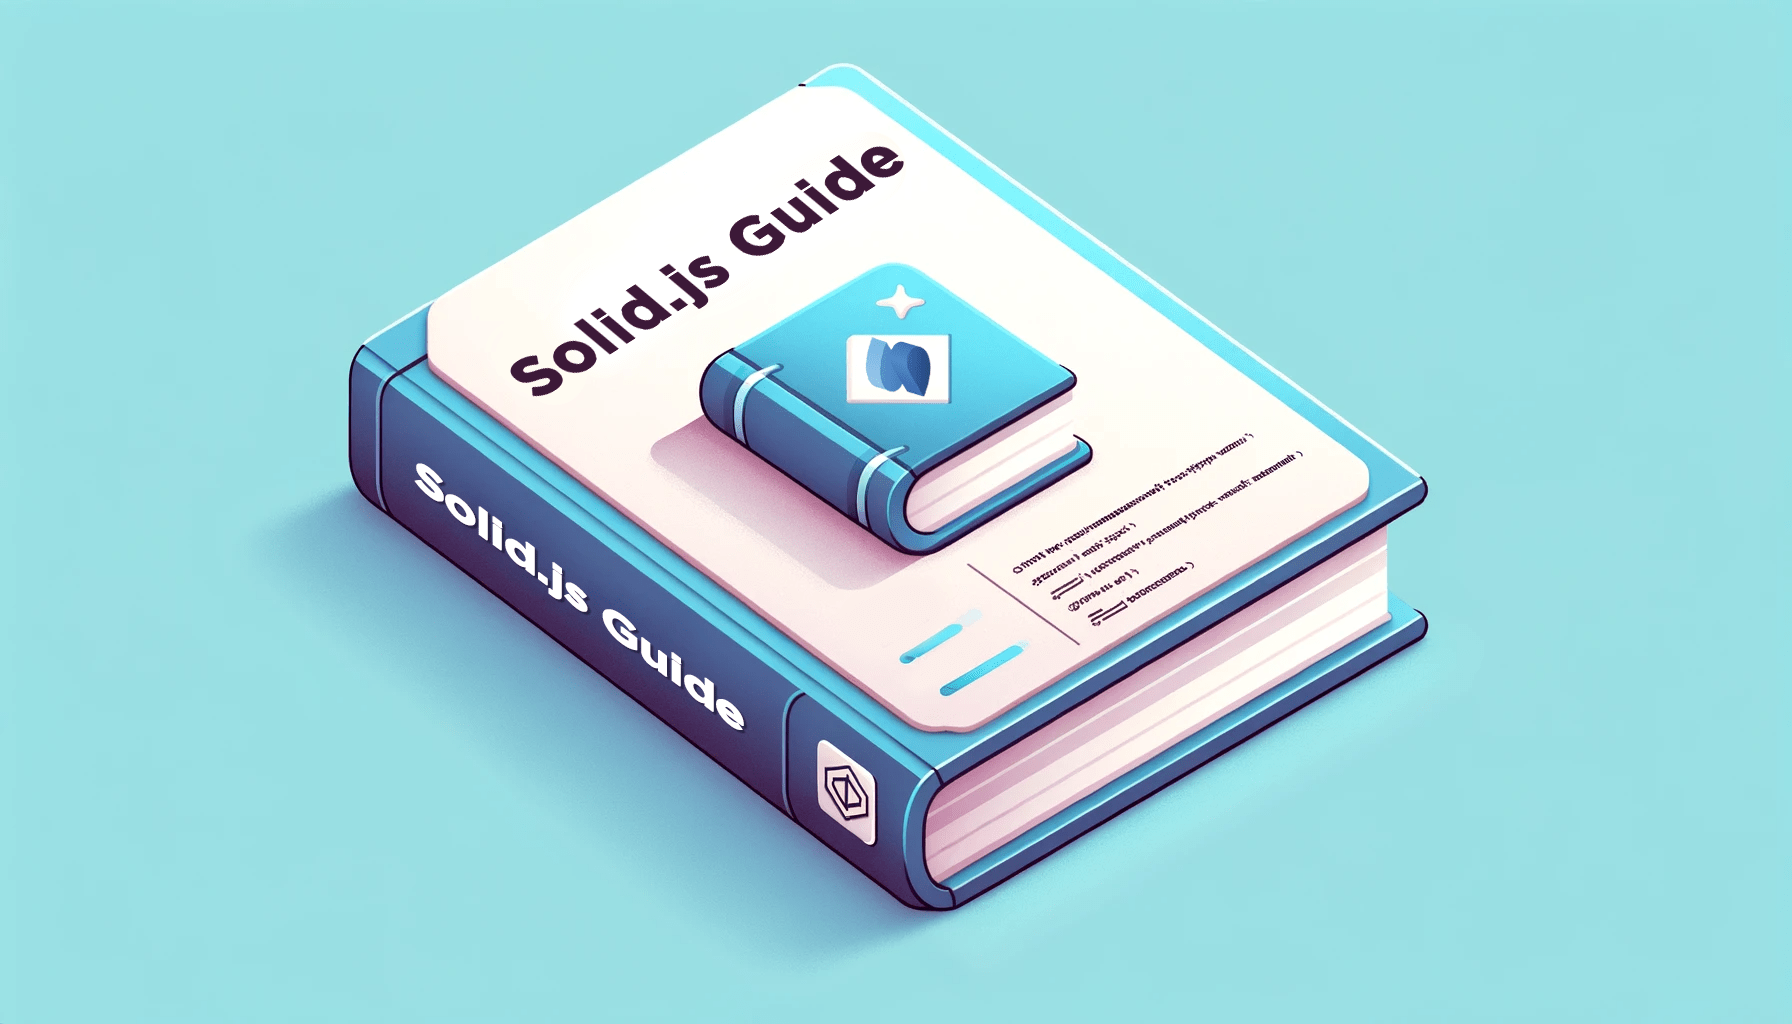 A Definitive Guide to Reactivity in Solid.js